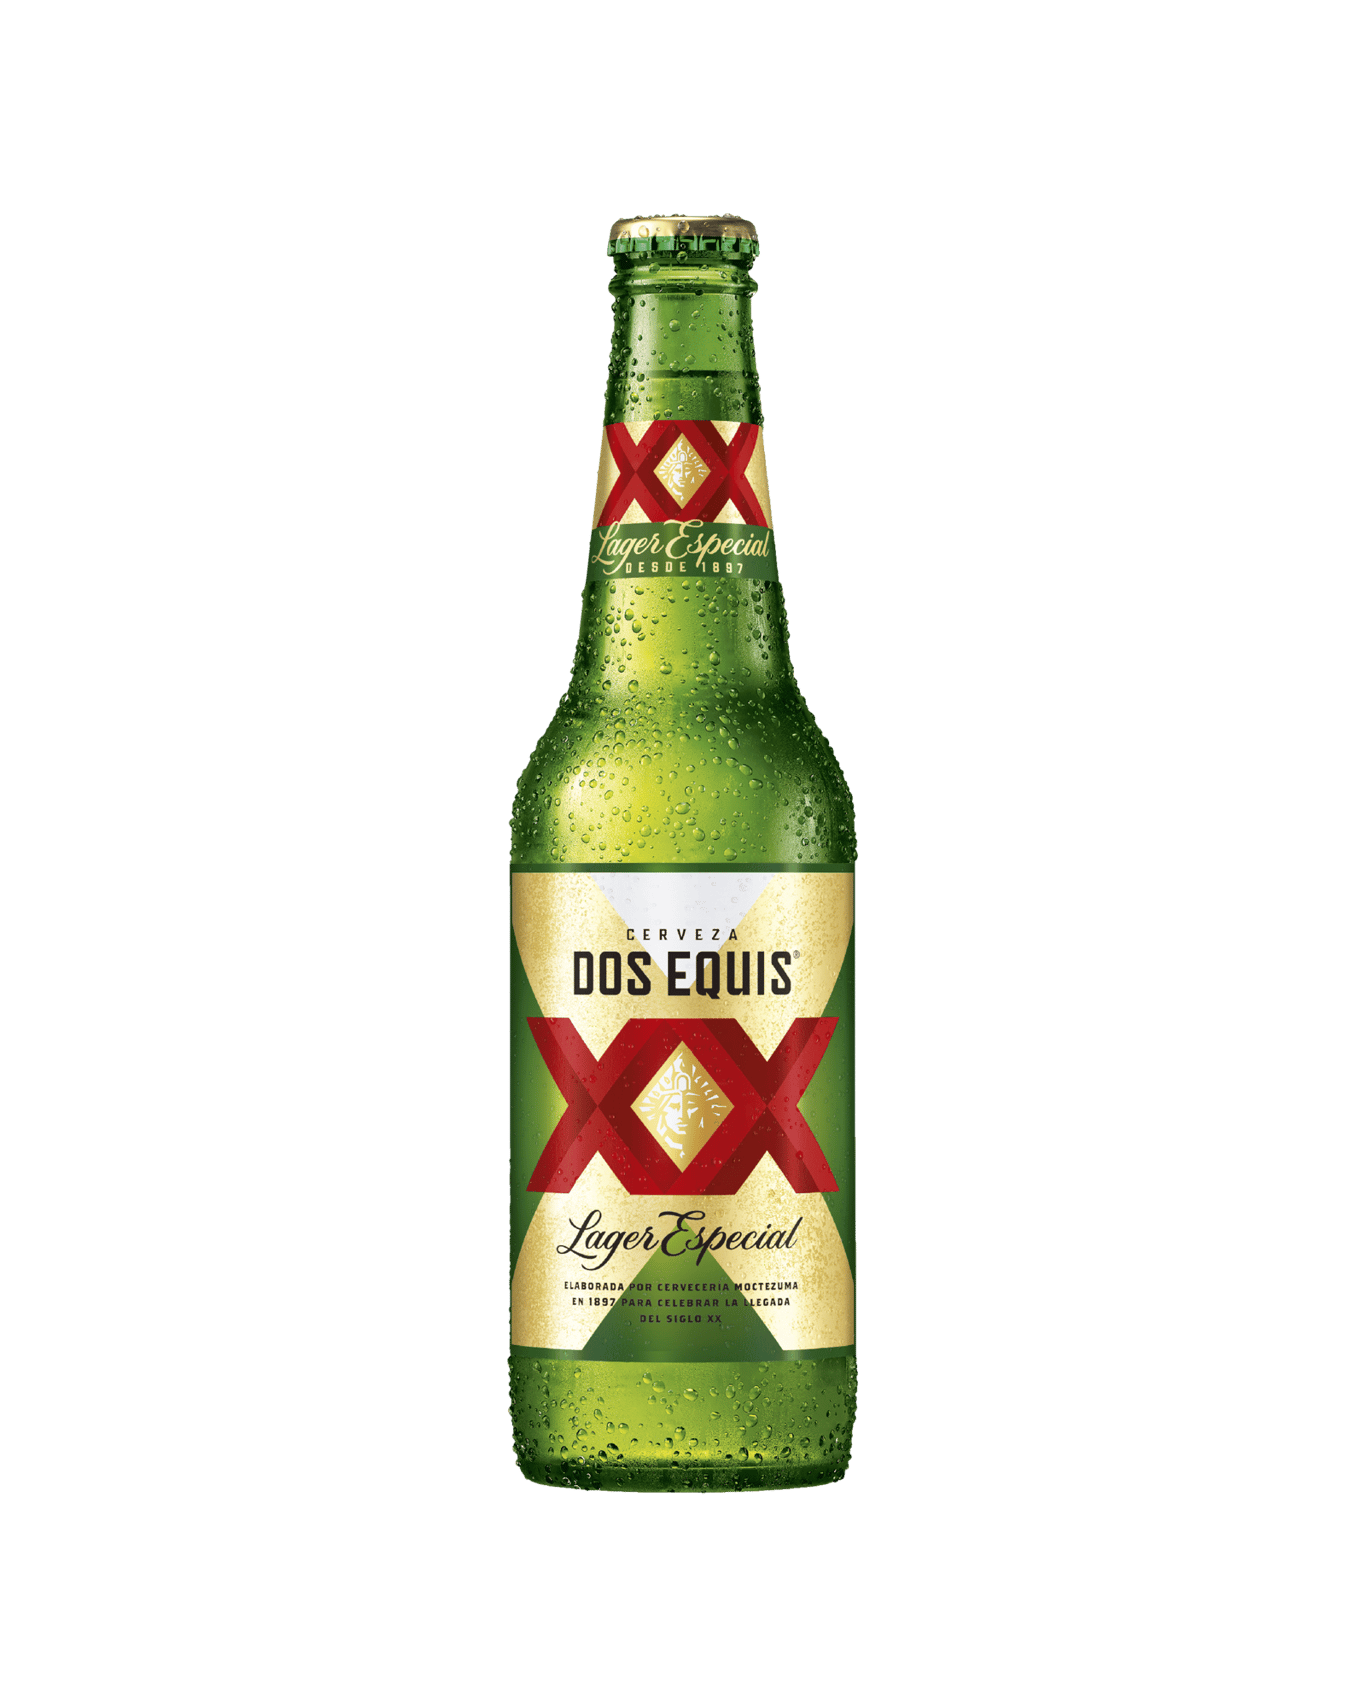 buy-dos-equis-lager-especial-355ml-online-or-near-you-in-australia